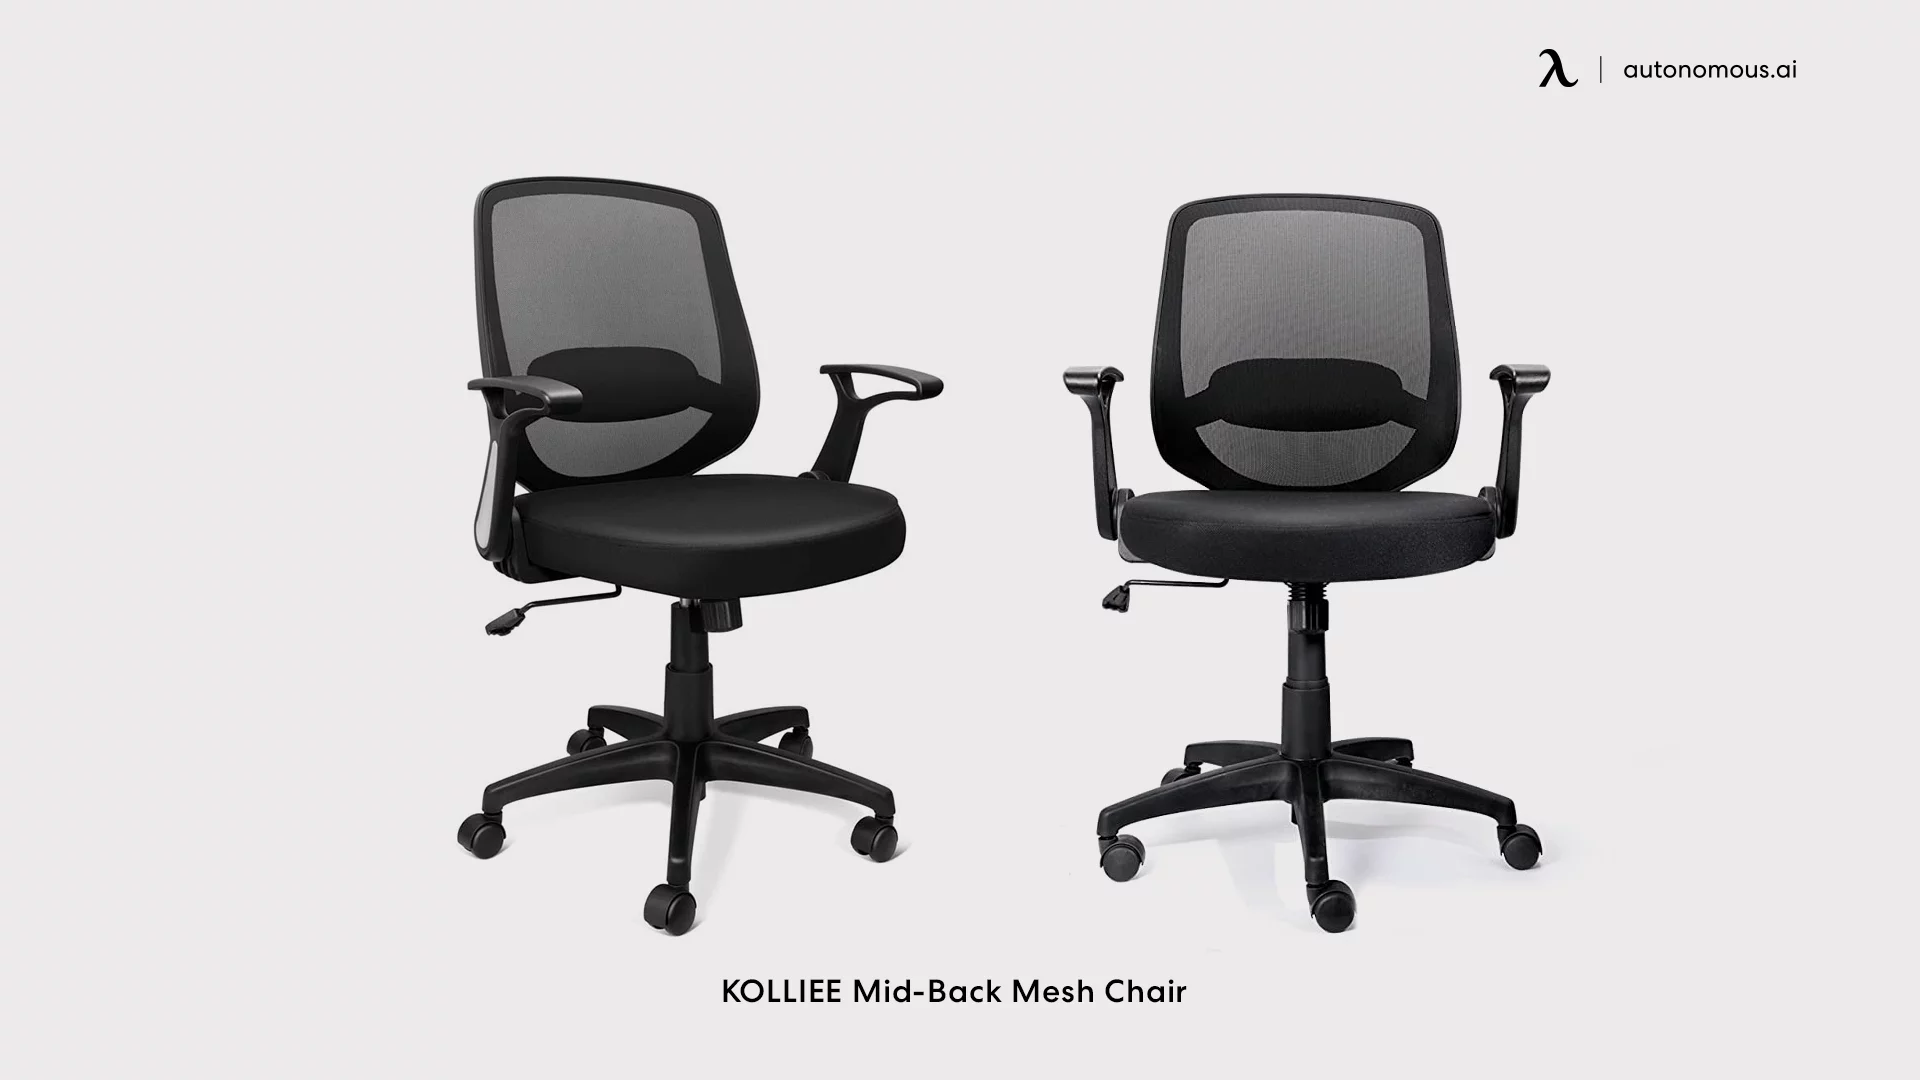 KOLLIEE Mid-Back Mesh office chair under $200